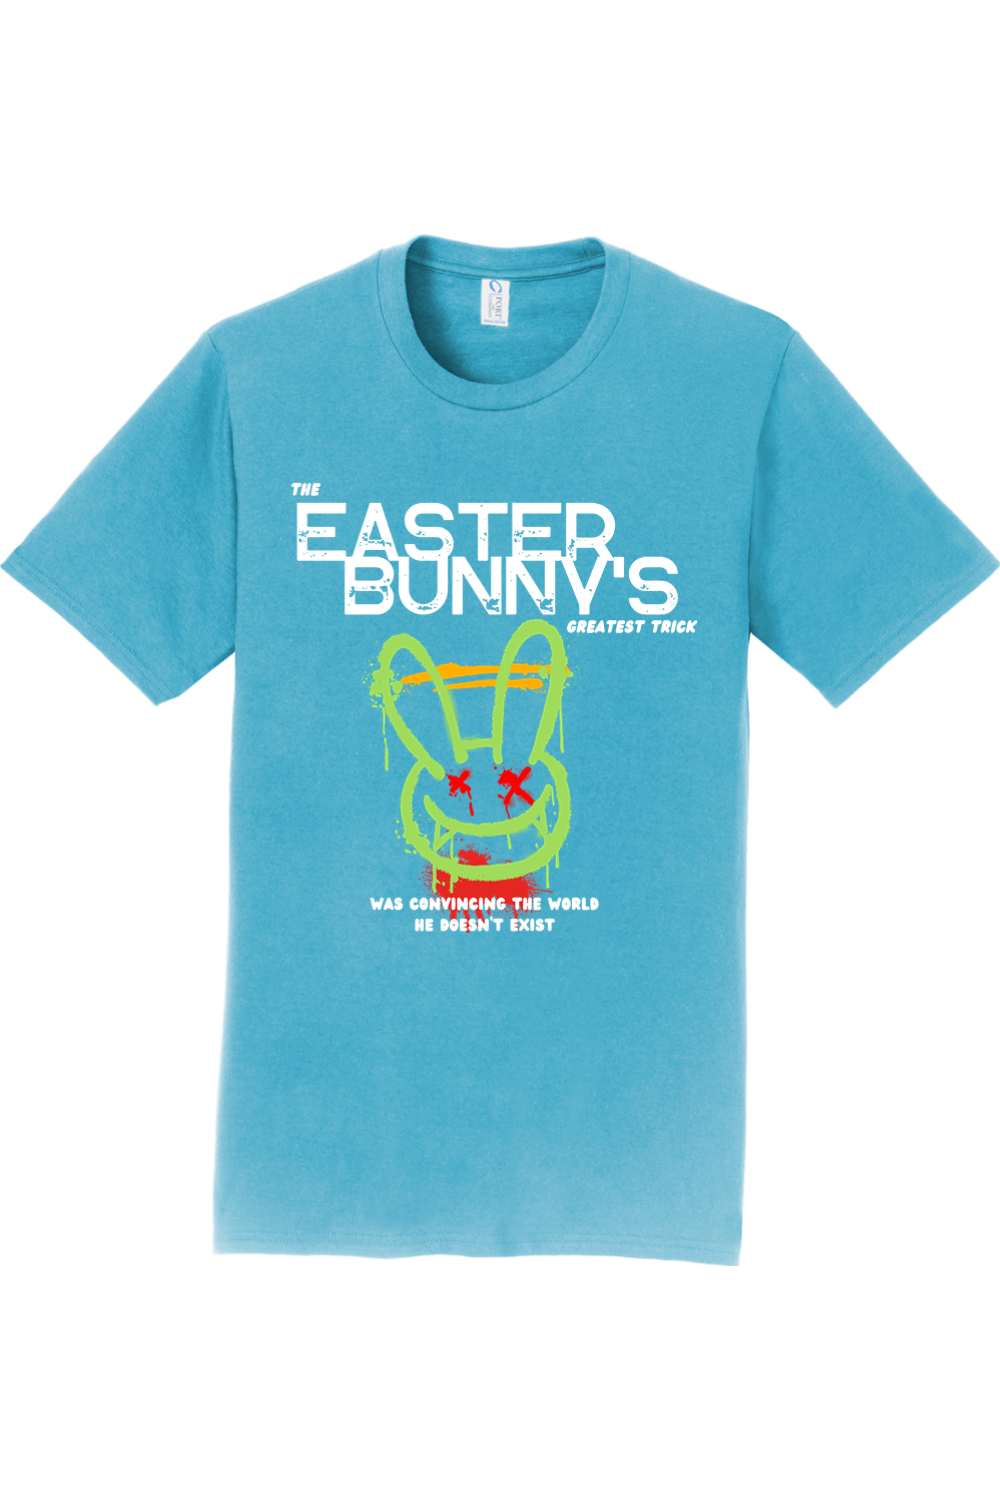 The Easter Bunny's Greatest Trick Paint Tee